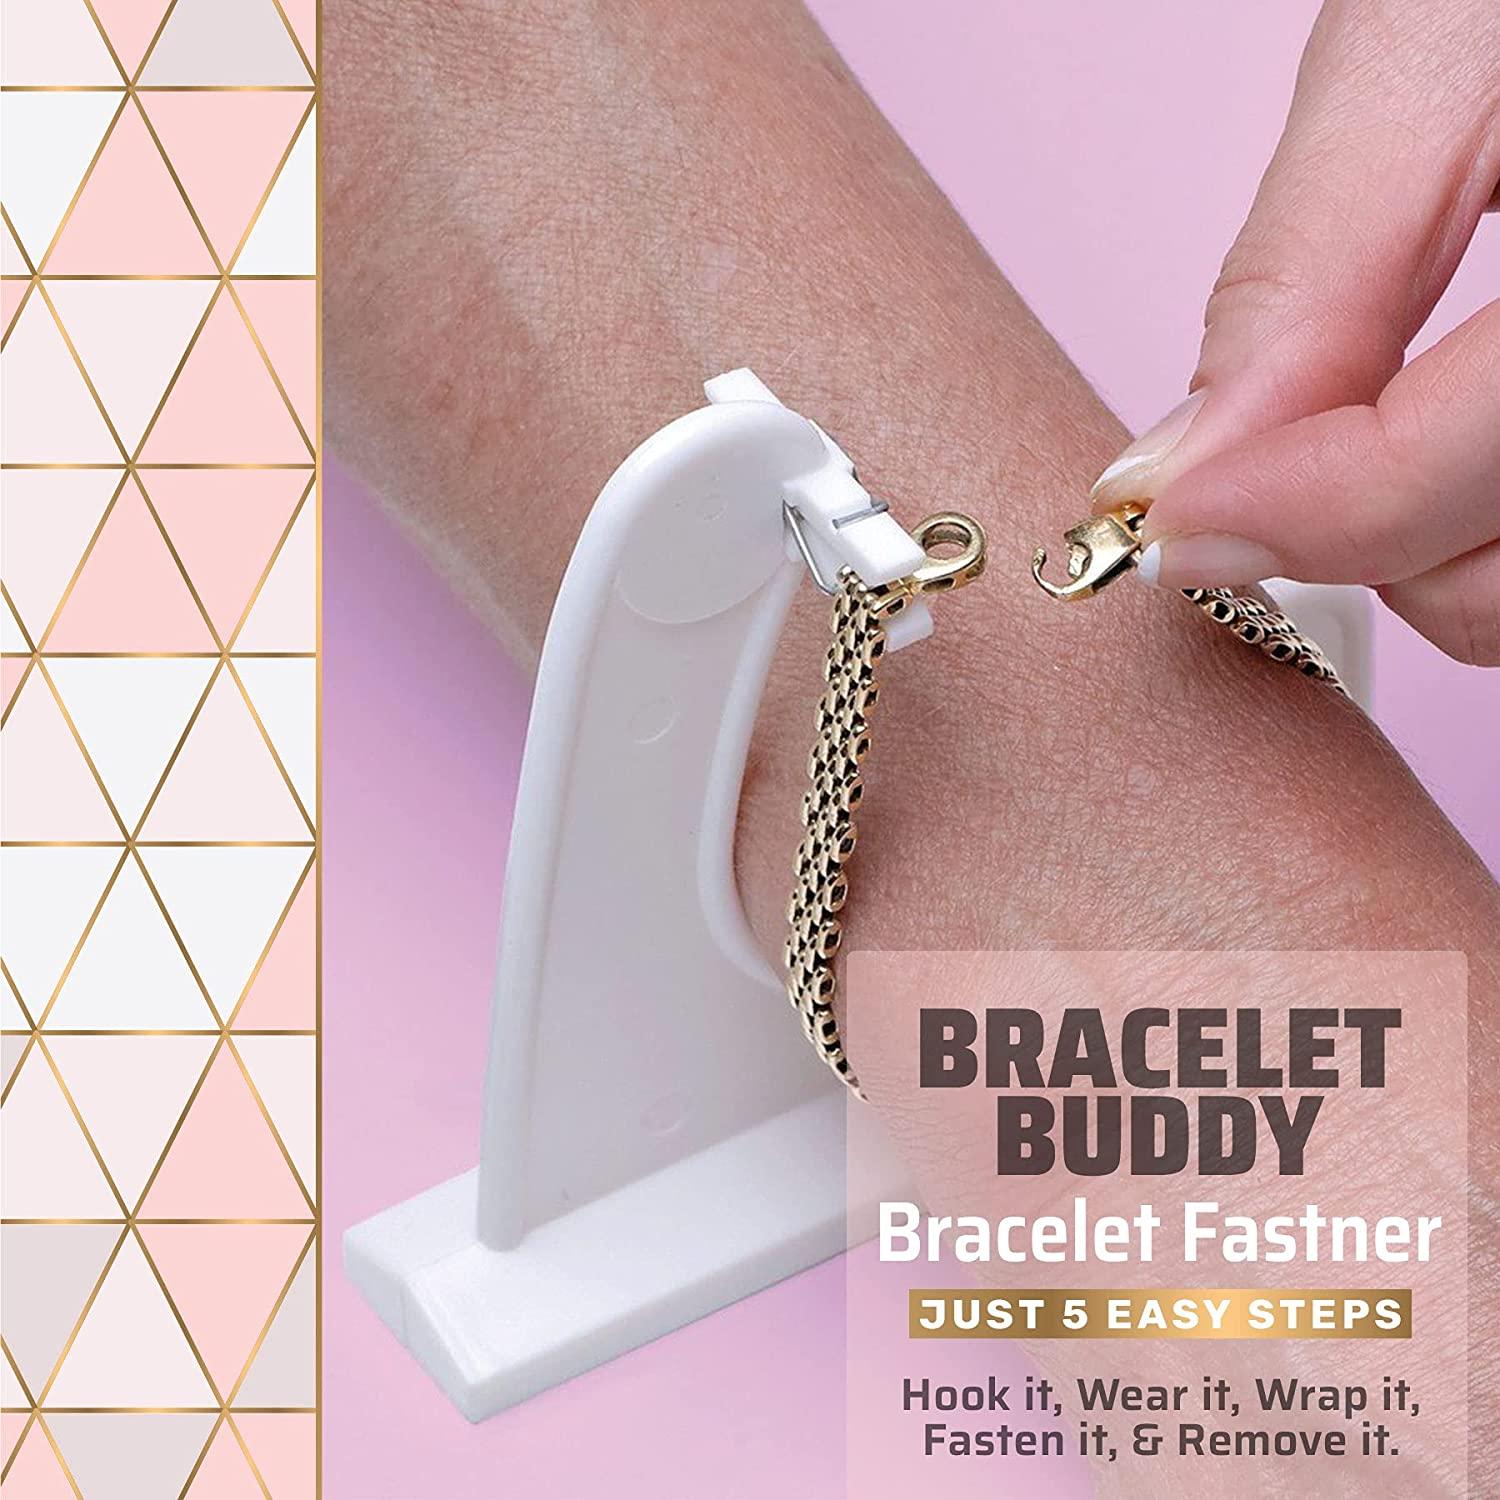 Medca Bracelet Buddy- Jewelry Helper Fastening Aid to Quickly Fasten and  Unfasten Bracelets or Watches - 2 Pack